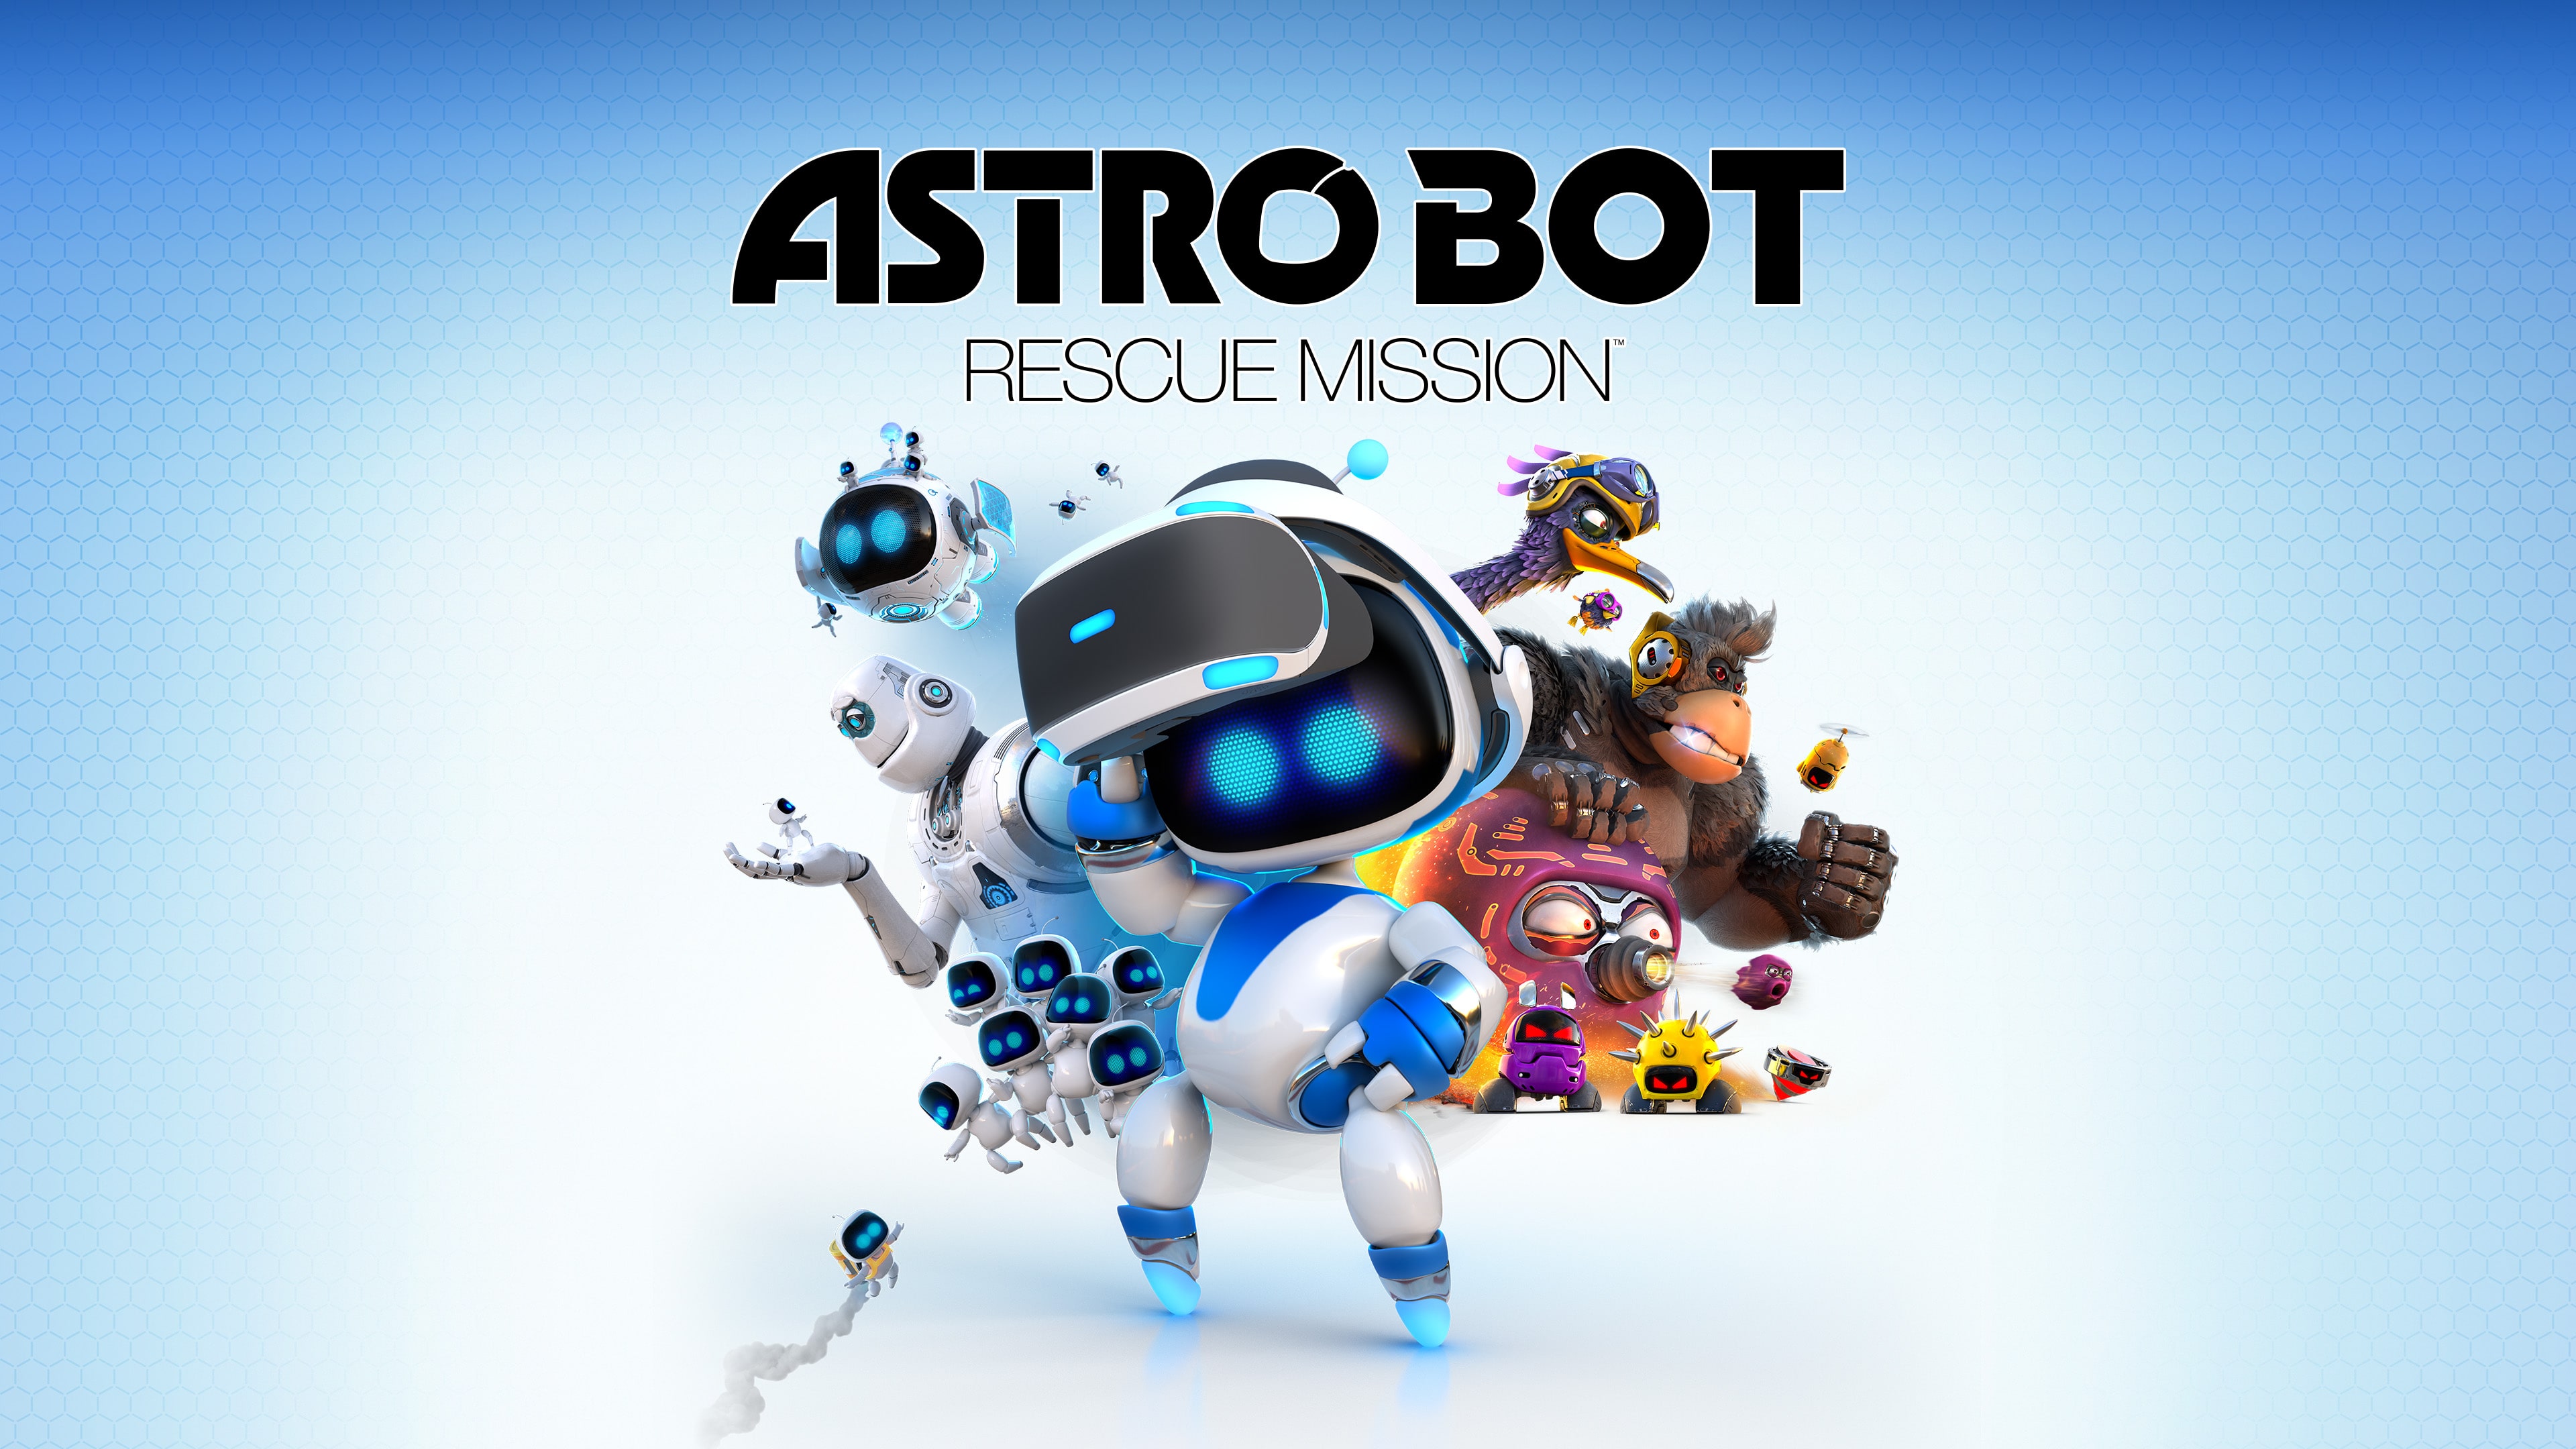 ASTROBOT: RESCUE MISSION (Simplified Chinese, English, Korean, Thai, Japanese, Traditional Chinese)